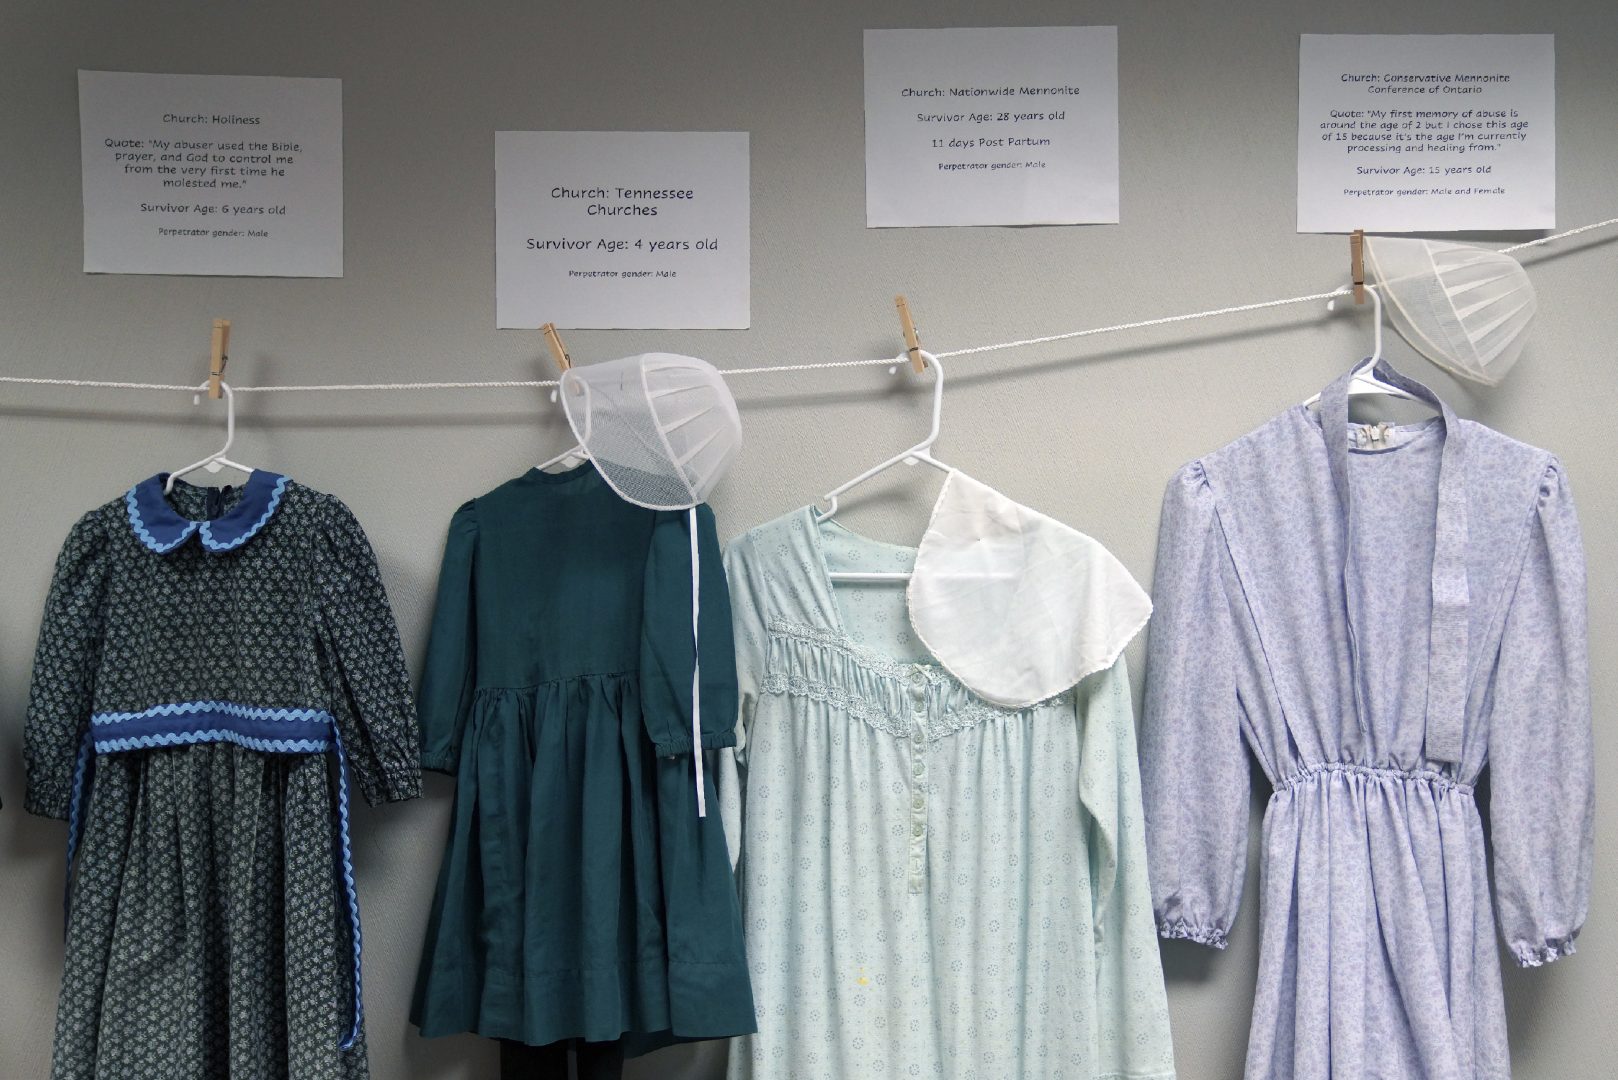 Dresses donated by sexual assault survivors from Amish and other plain-dressing religious groups hang on a clothesline beneath a description of each survivors' age and church affiliation, on Friday, April 29, 2022, in Leola, Pa. The exhibit's purpose was to show that sexual assault is a reality among children and adults in such groups. Similar exhibits held nationwide aim to shatter the myth that abuse is caused by a victim's clothing choice. (AP Photo/Jessie Wardarski)